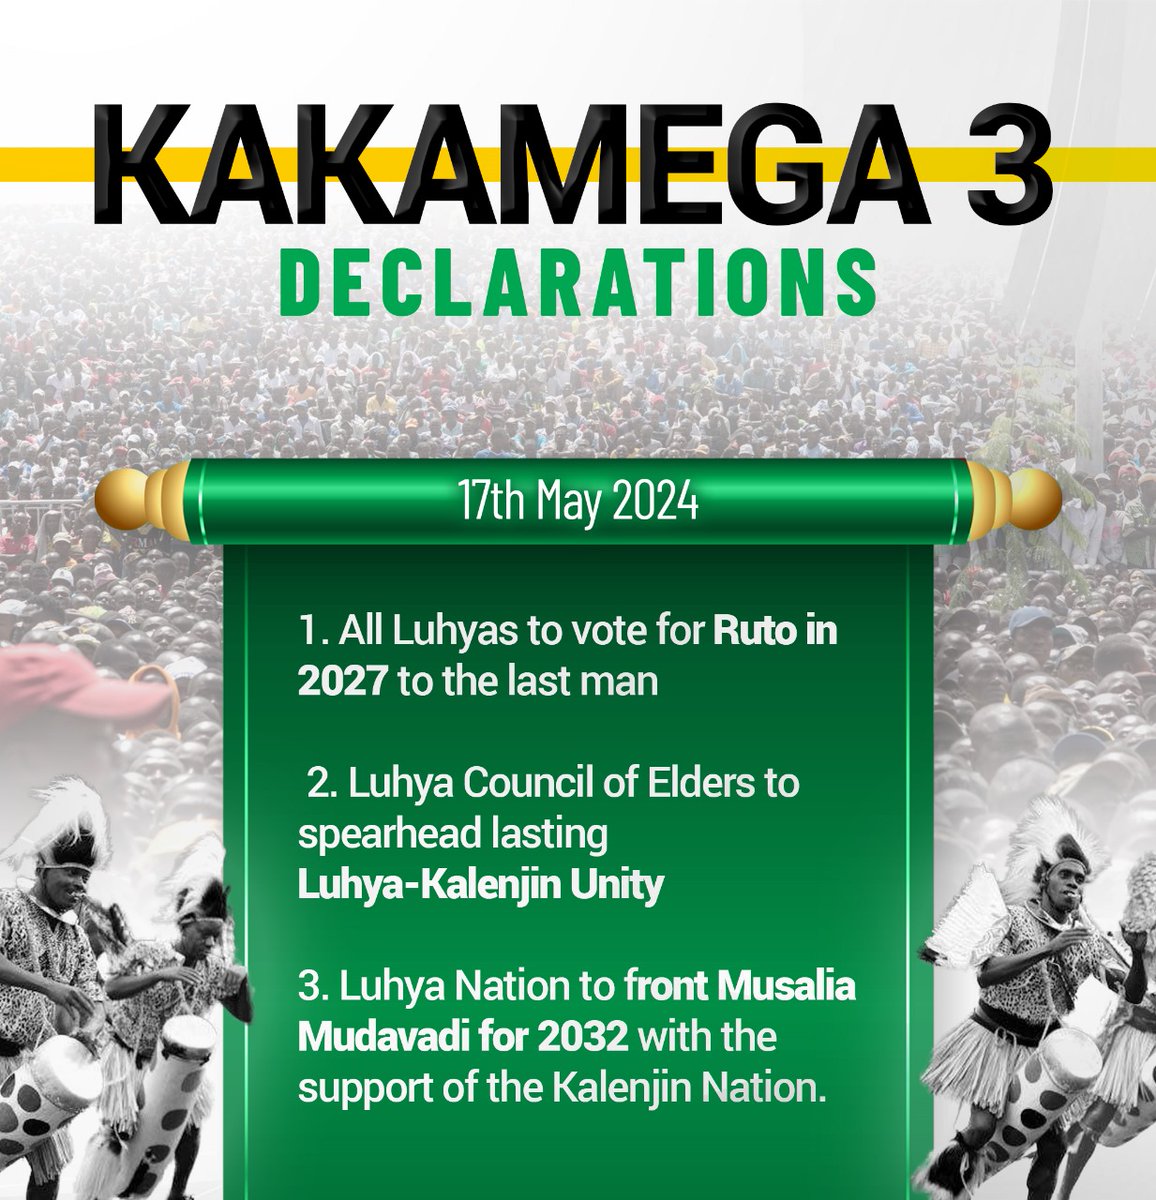 He has a clear vision for Kenya's future, emphasizing the importance of unity and national cohesion, which are crucial for the country's development. #AbaLuhya3 Mudavadi 2032 Mulembe Declaration